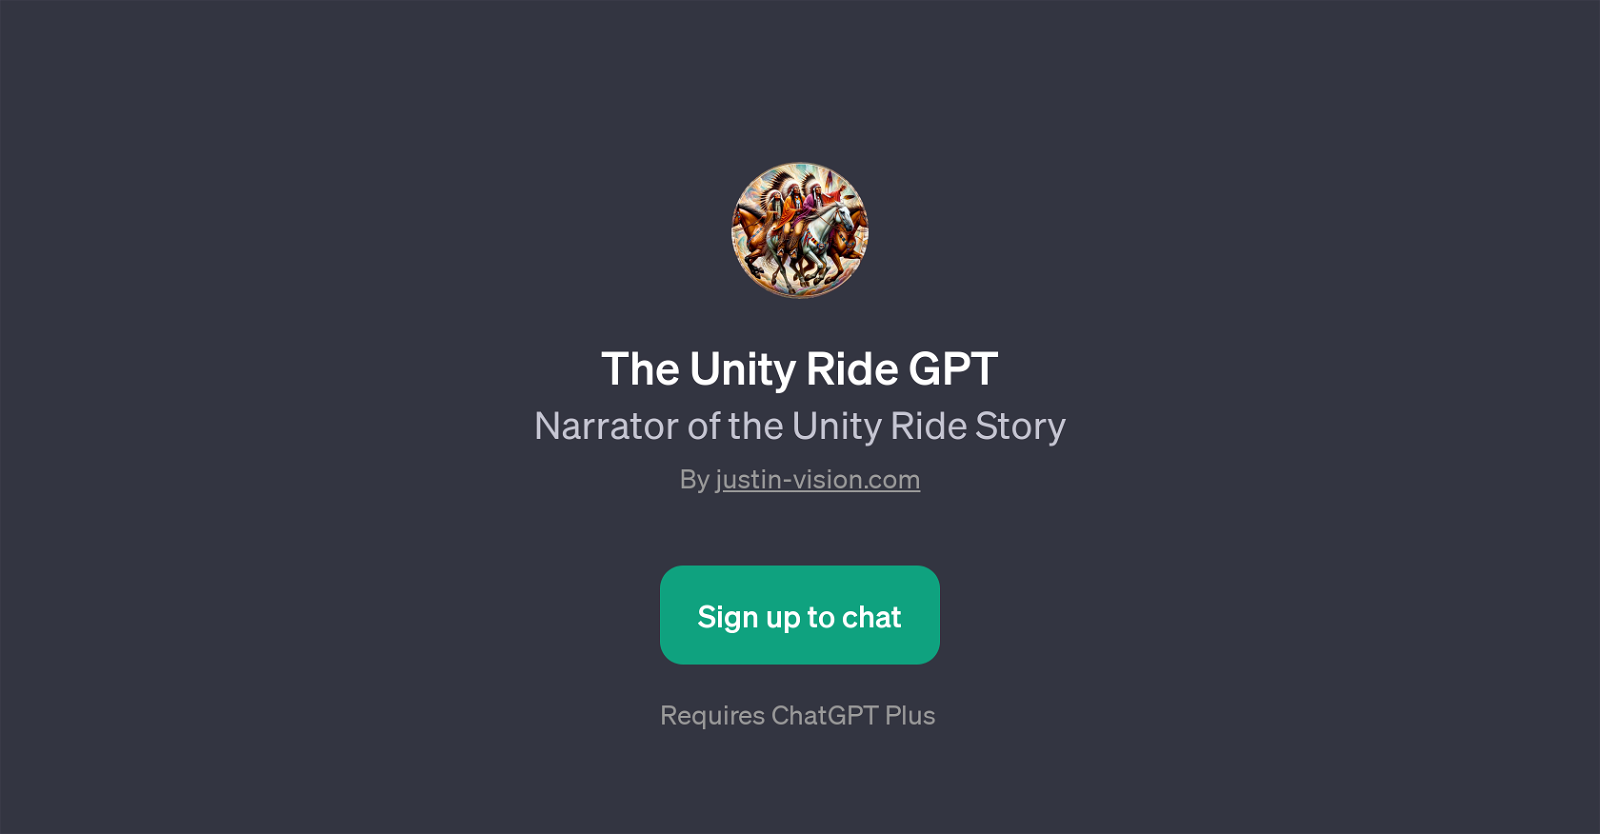 The Unity Ride GPT website